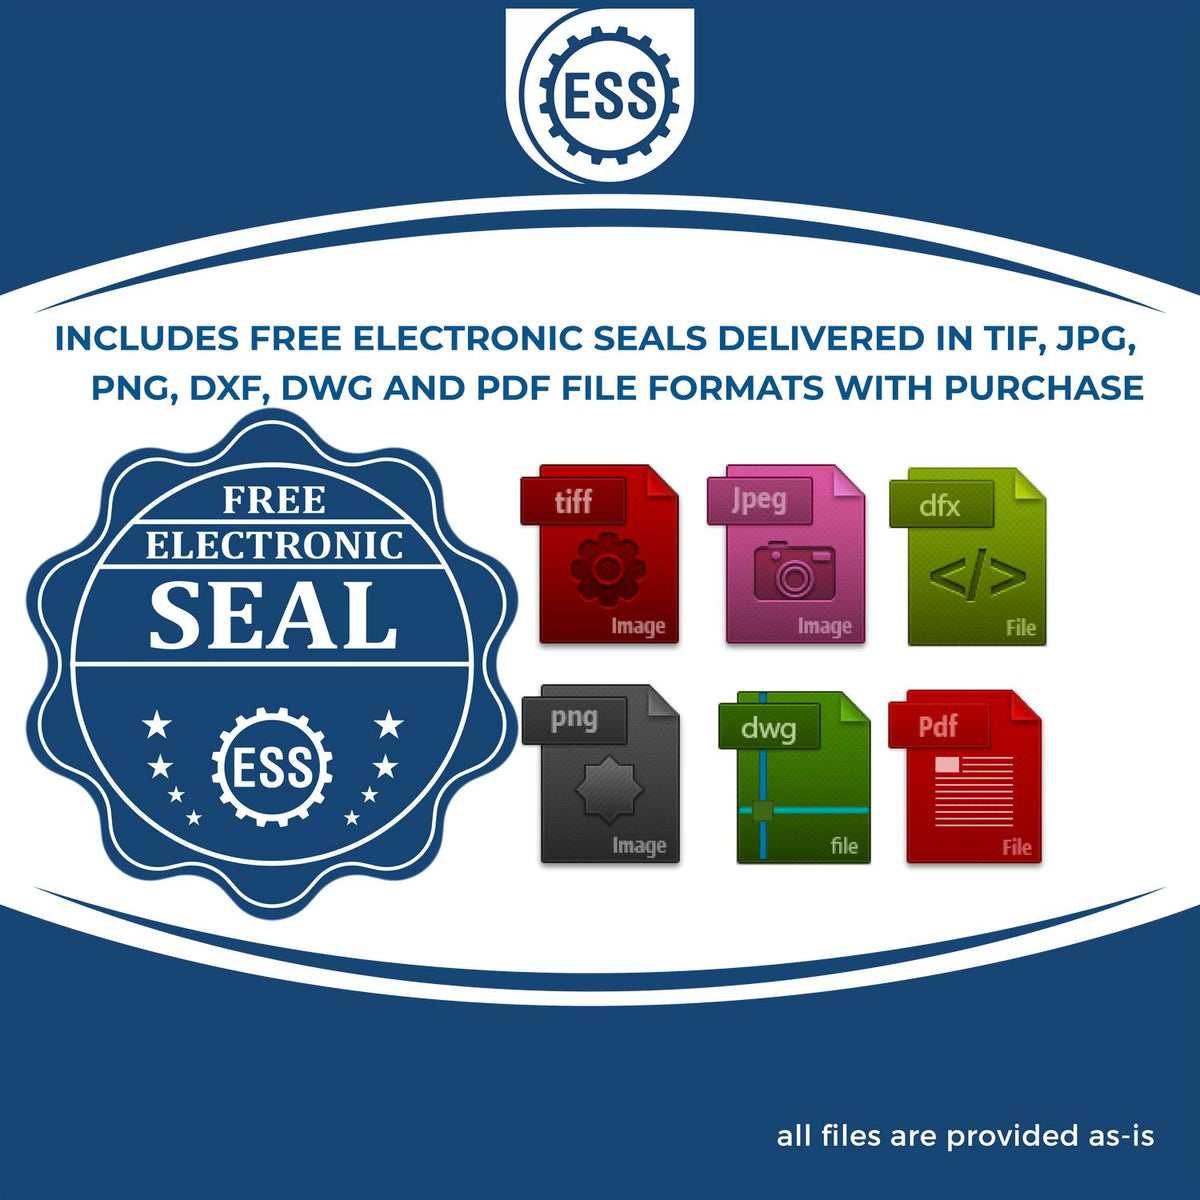 An infographic for the free electronic seal for the Gift Minnesota Architect Seal illustrating the different file type icons such as DXF, DWG, TIF, JPG and PNG.